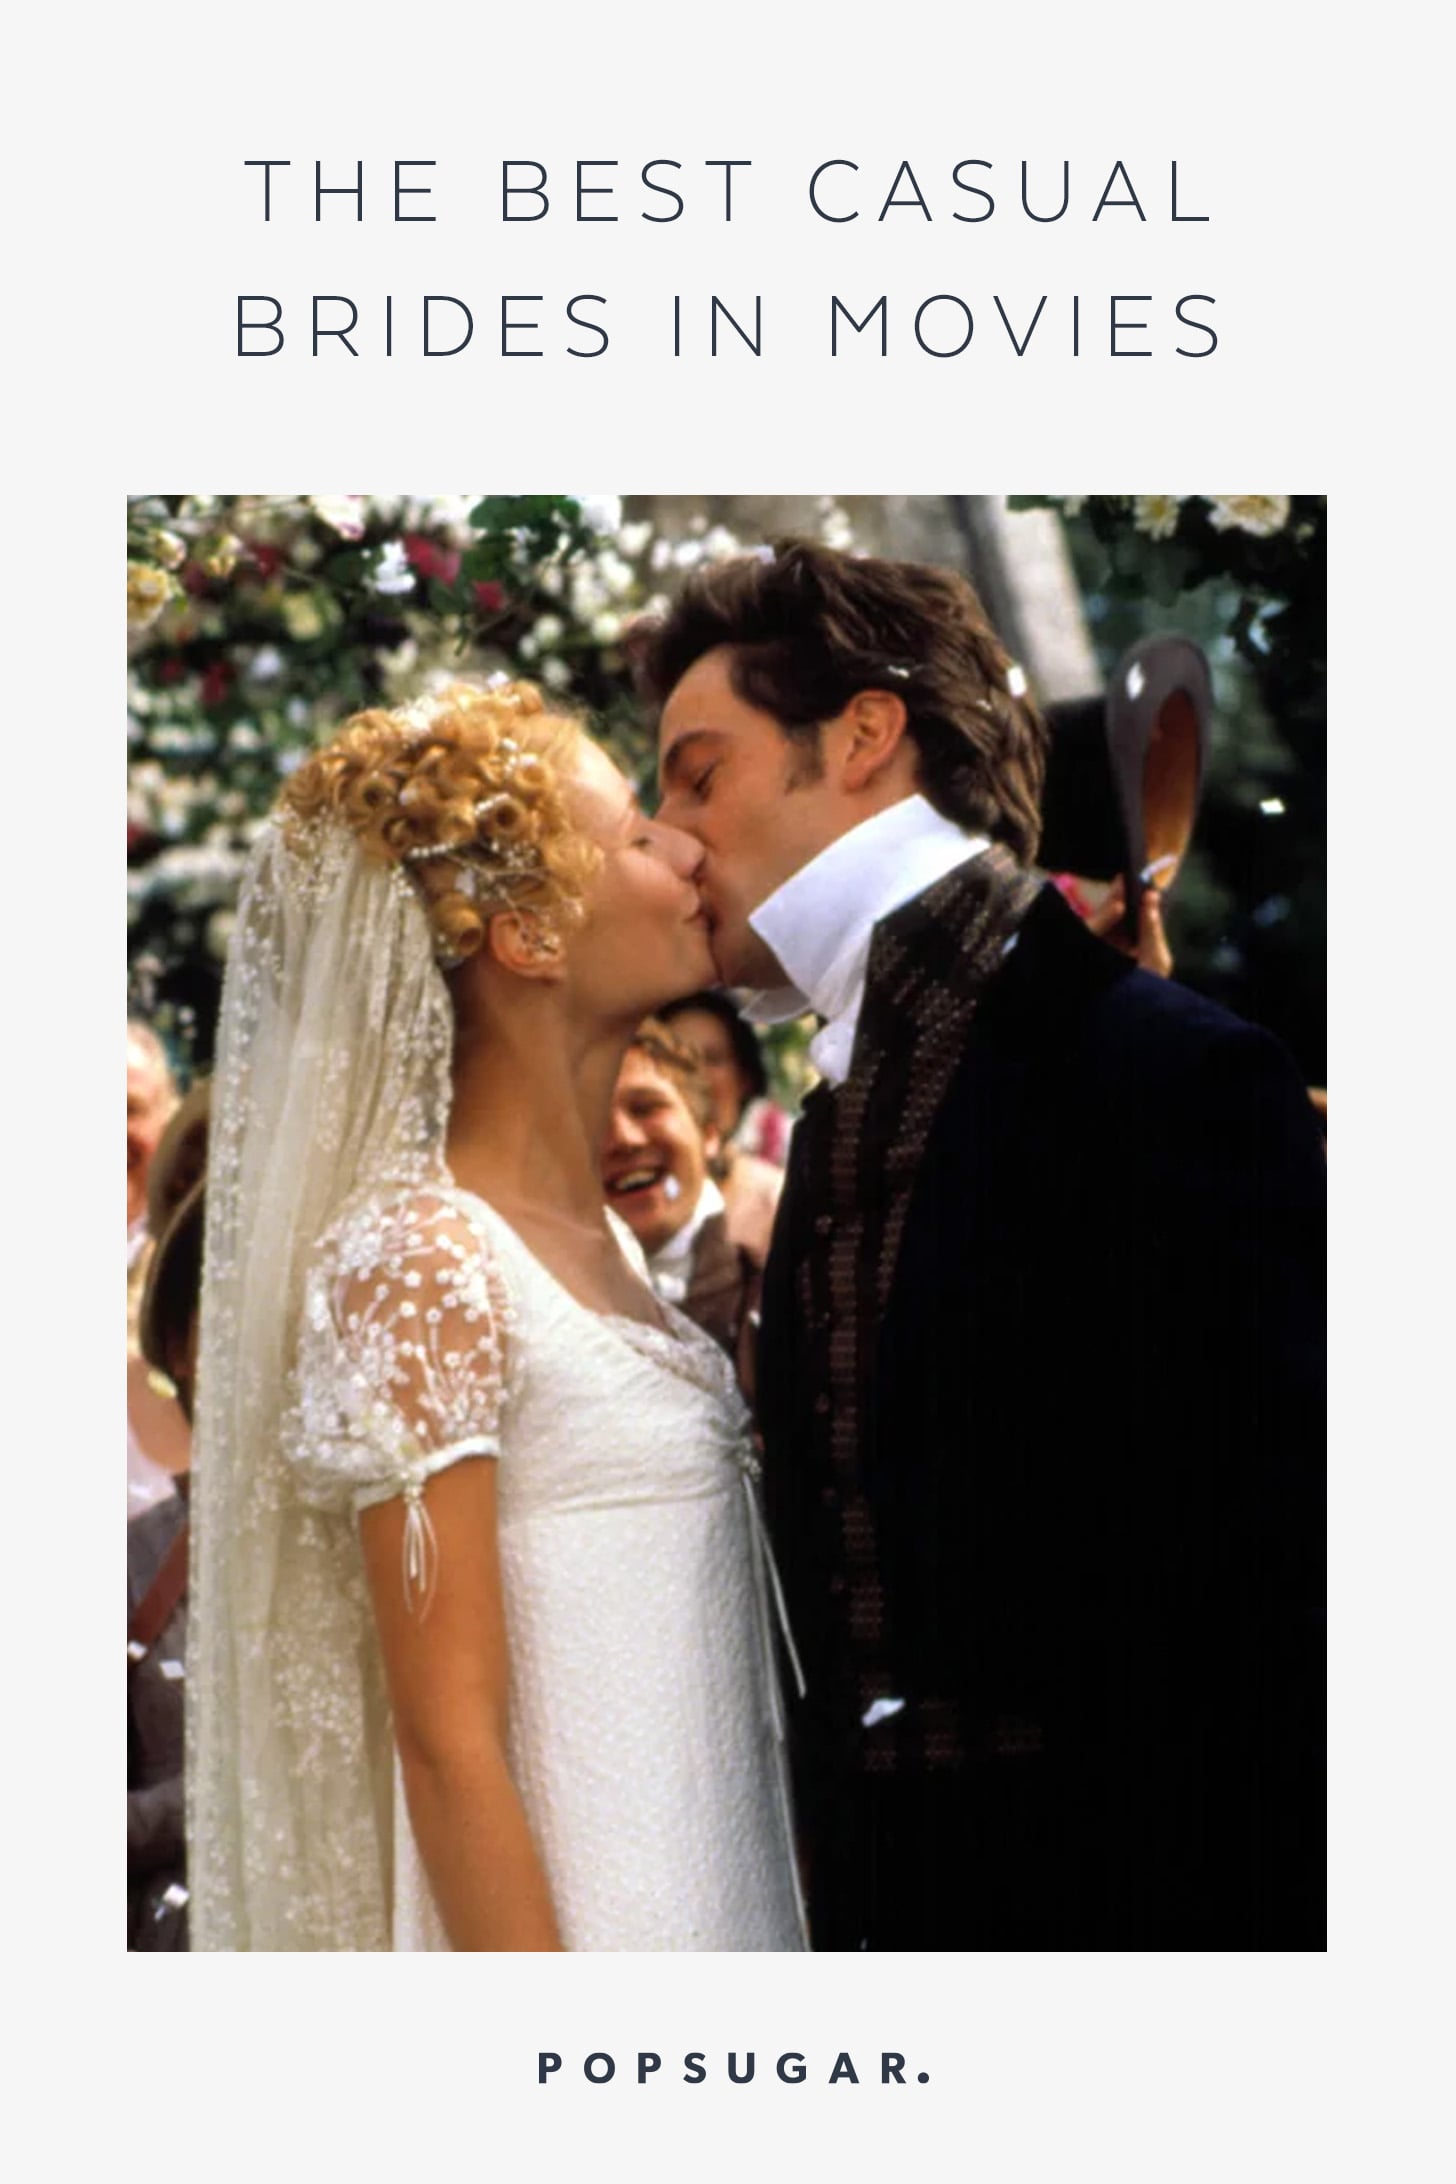 The Best Nontraditional Wedding Dresses From Movie Brides | POPSUGAR Fashion